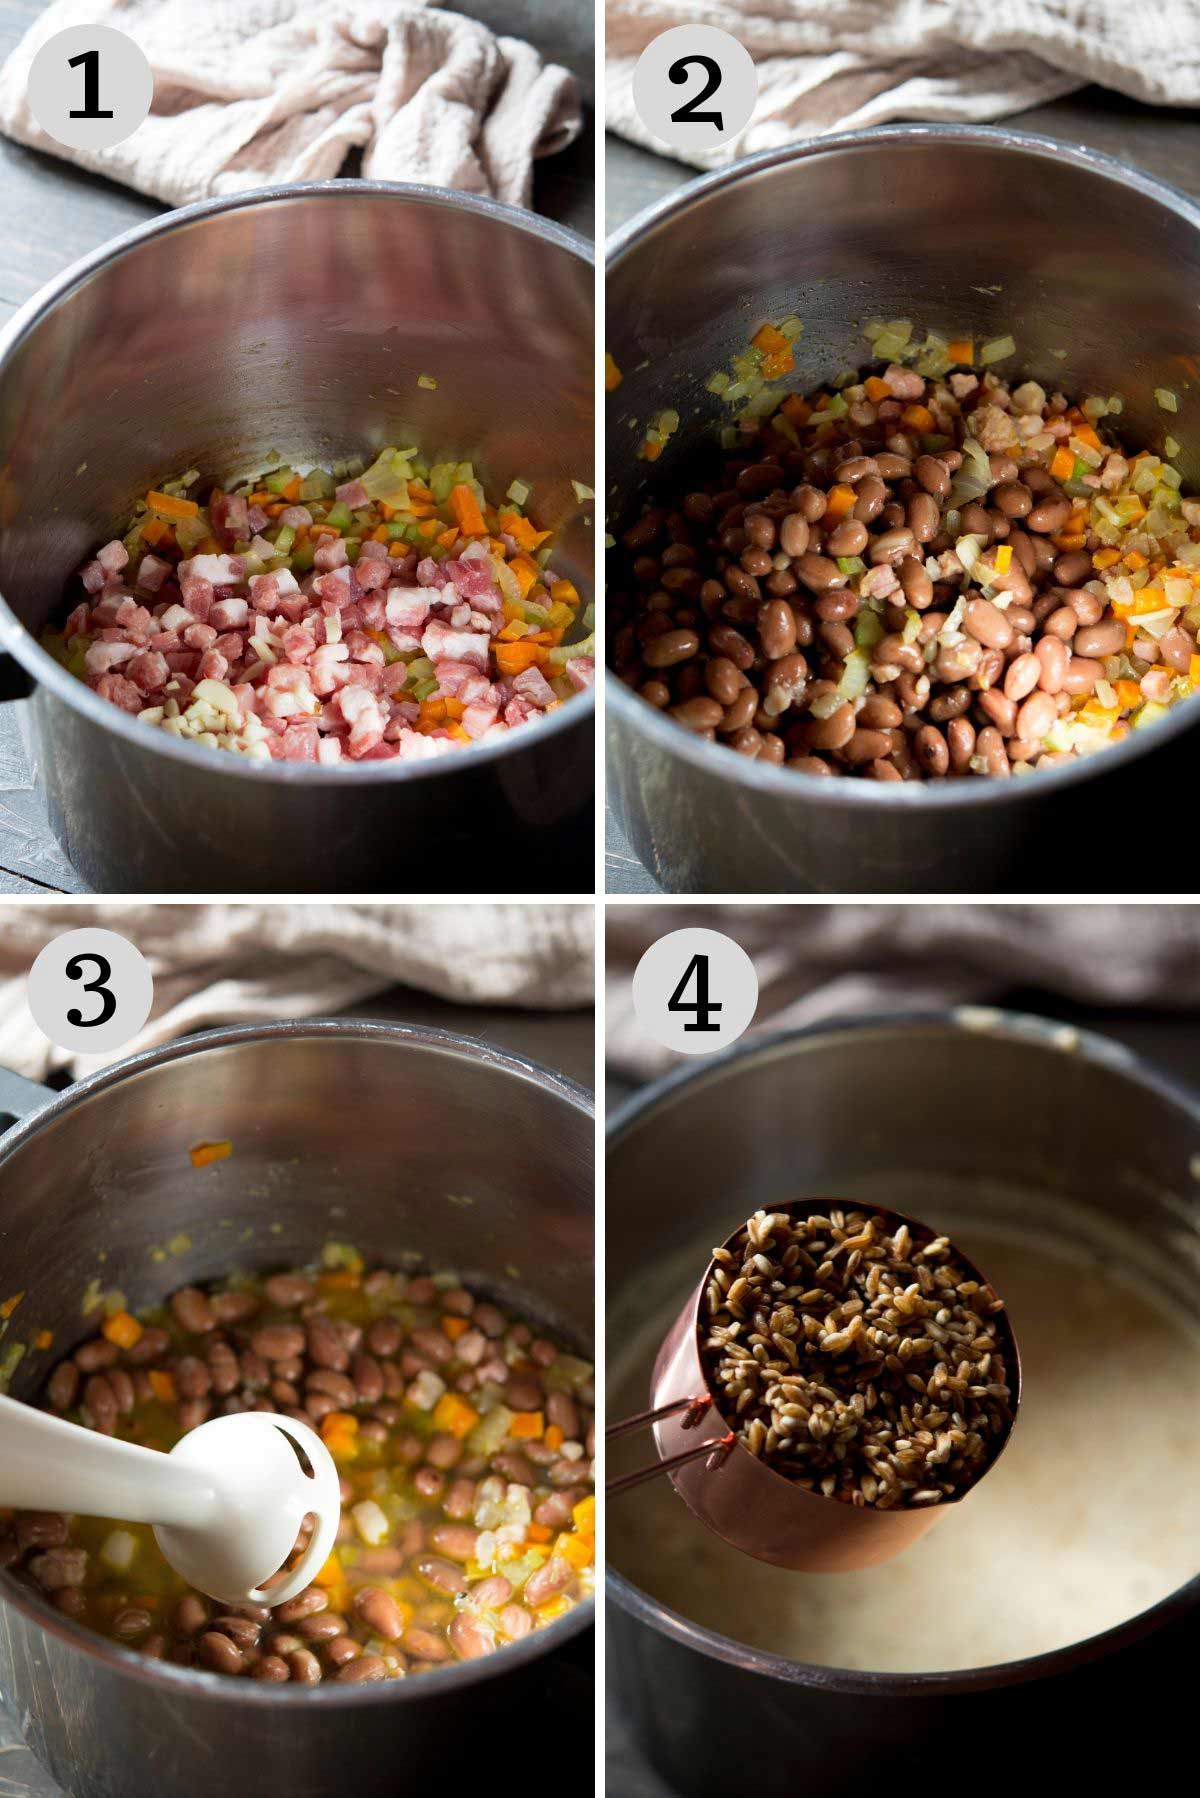 Step by step photos showing how to make Tuscan farro soup